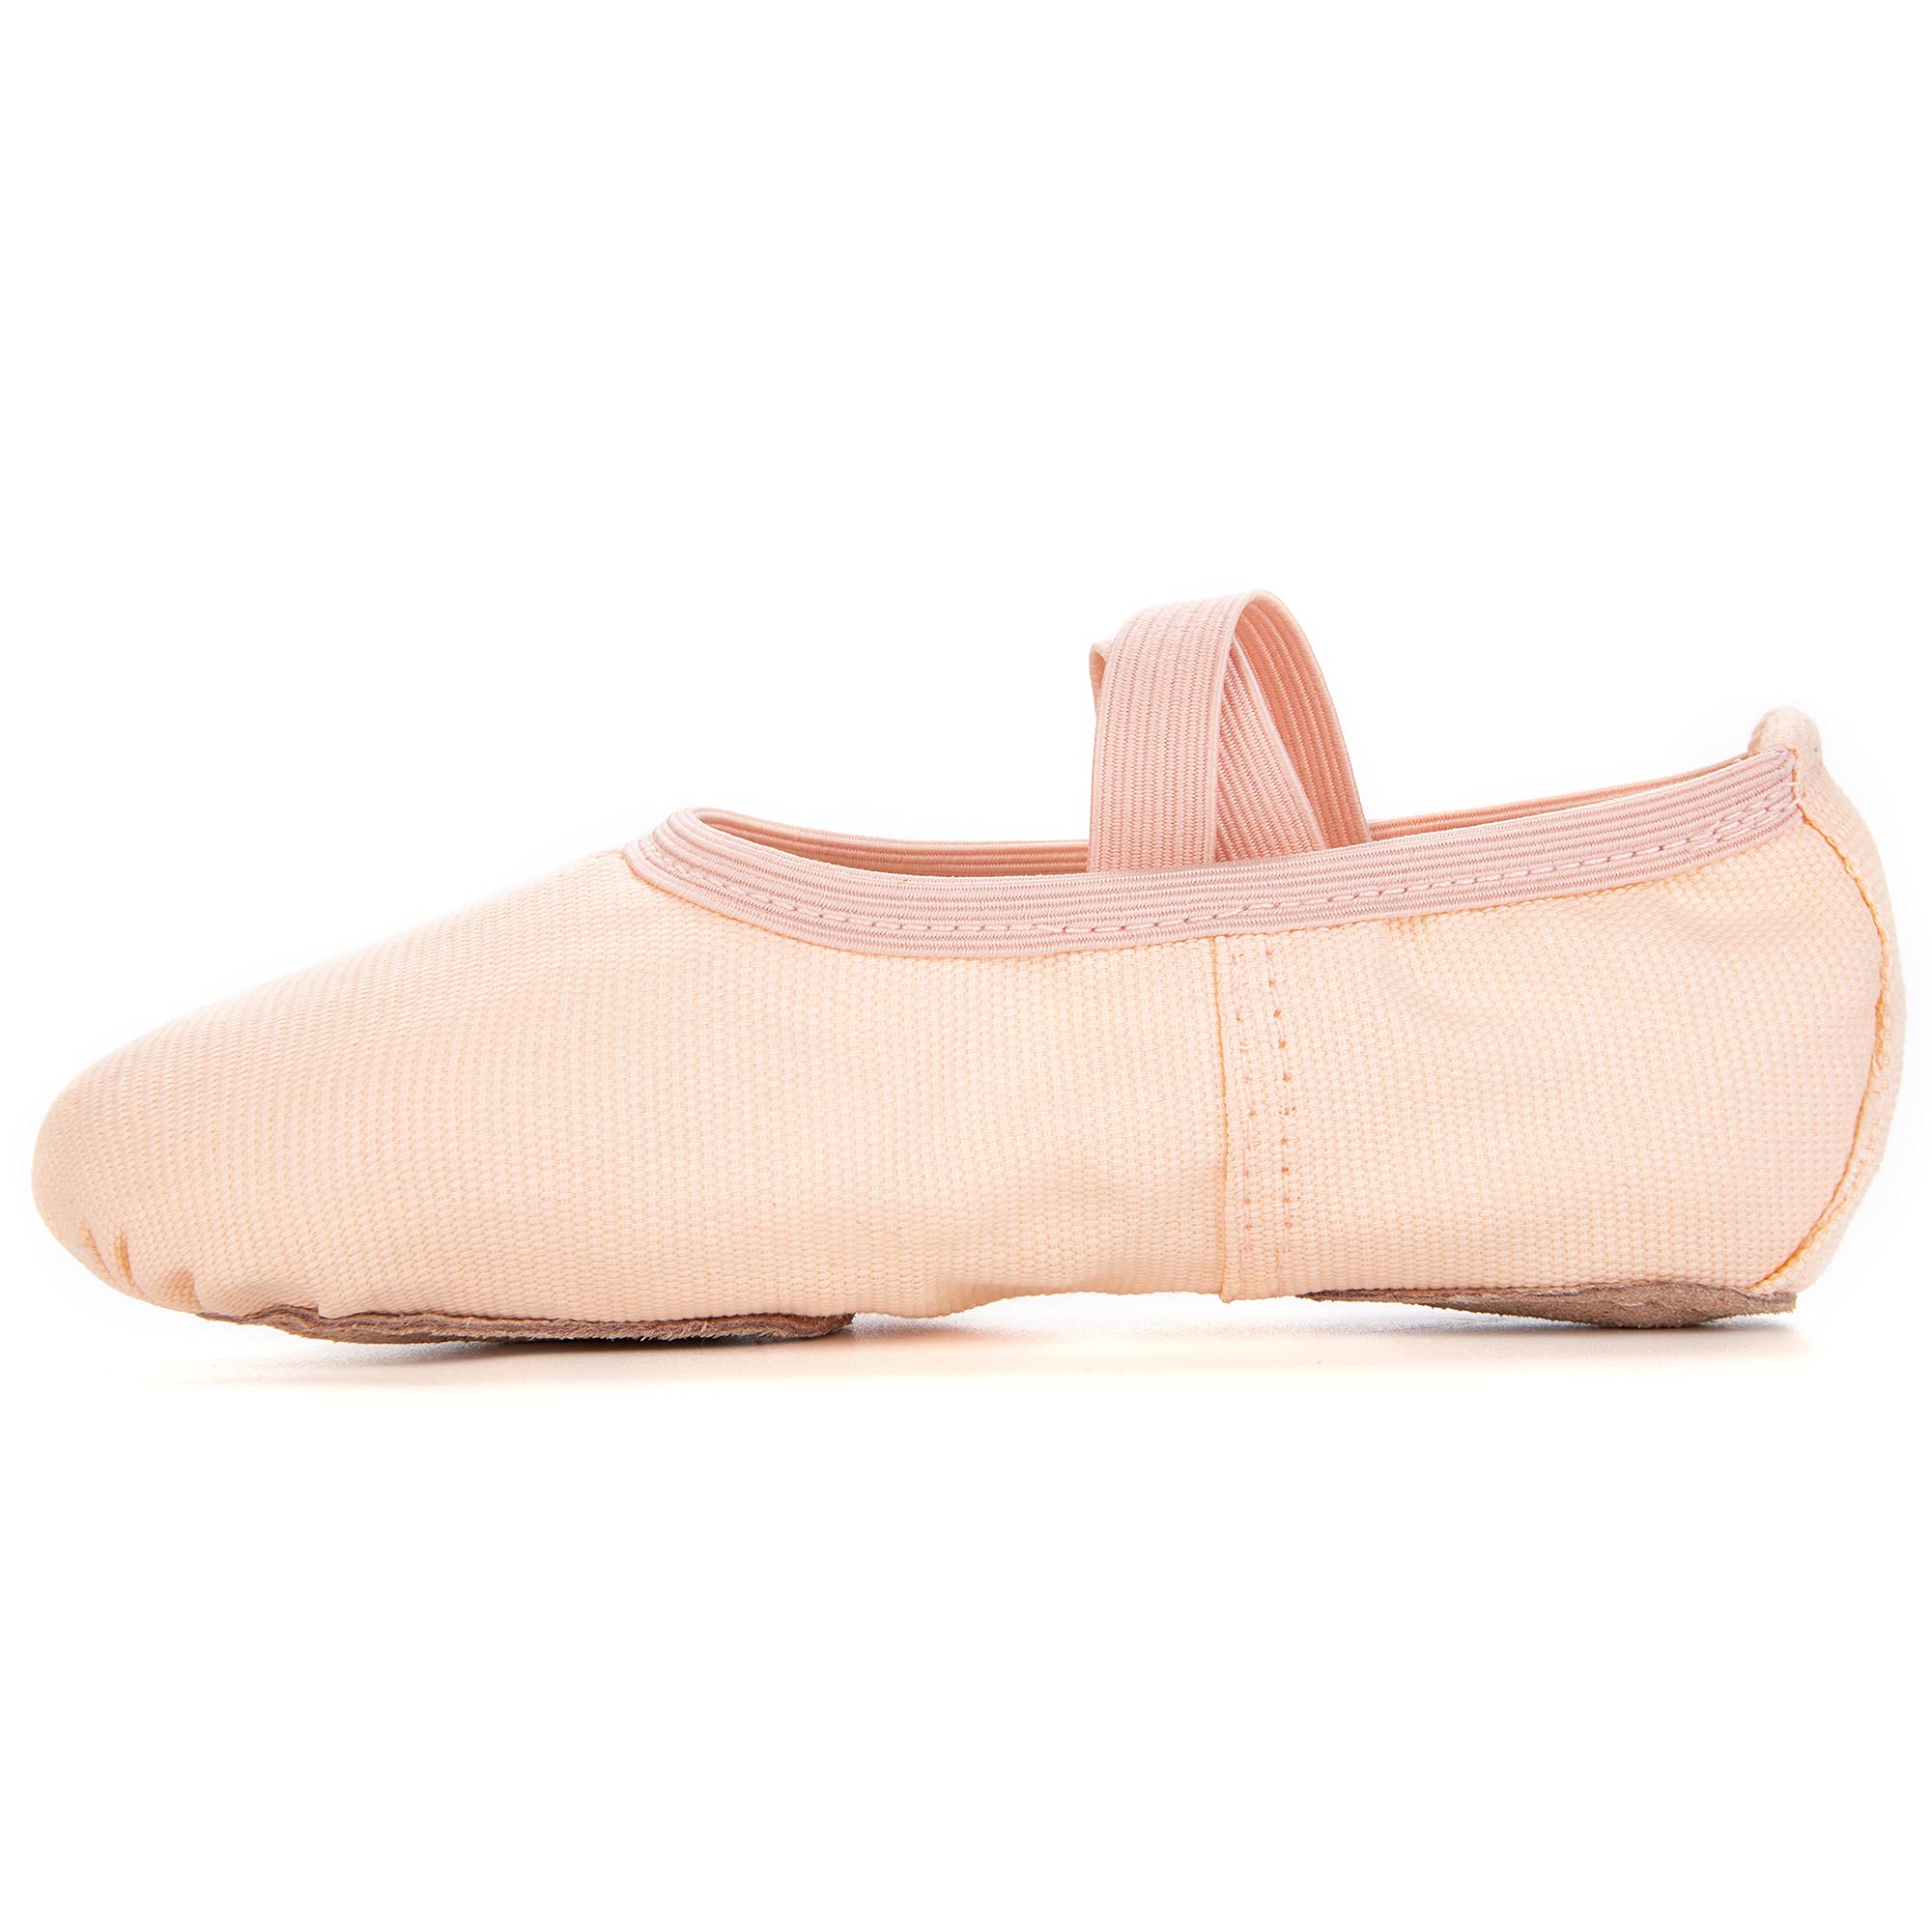 RoseMoli Canvas Ballet Slippers Flats for Girls/Toddlers/Kids/Women, Yoga Practice Shoes for Dancing